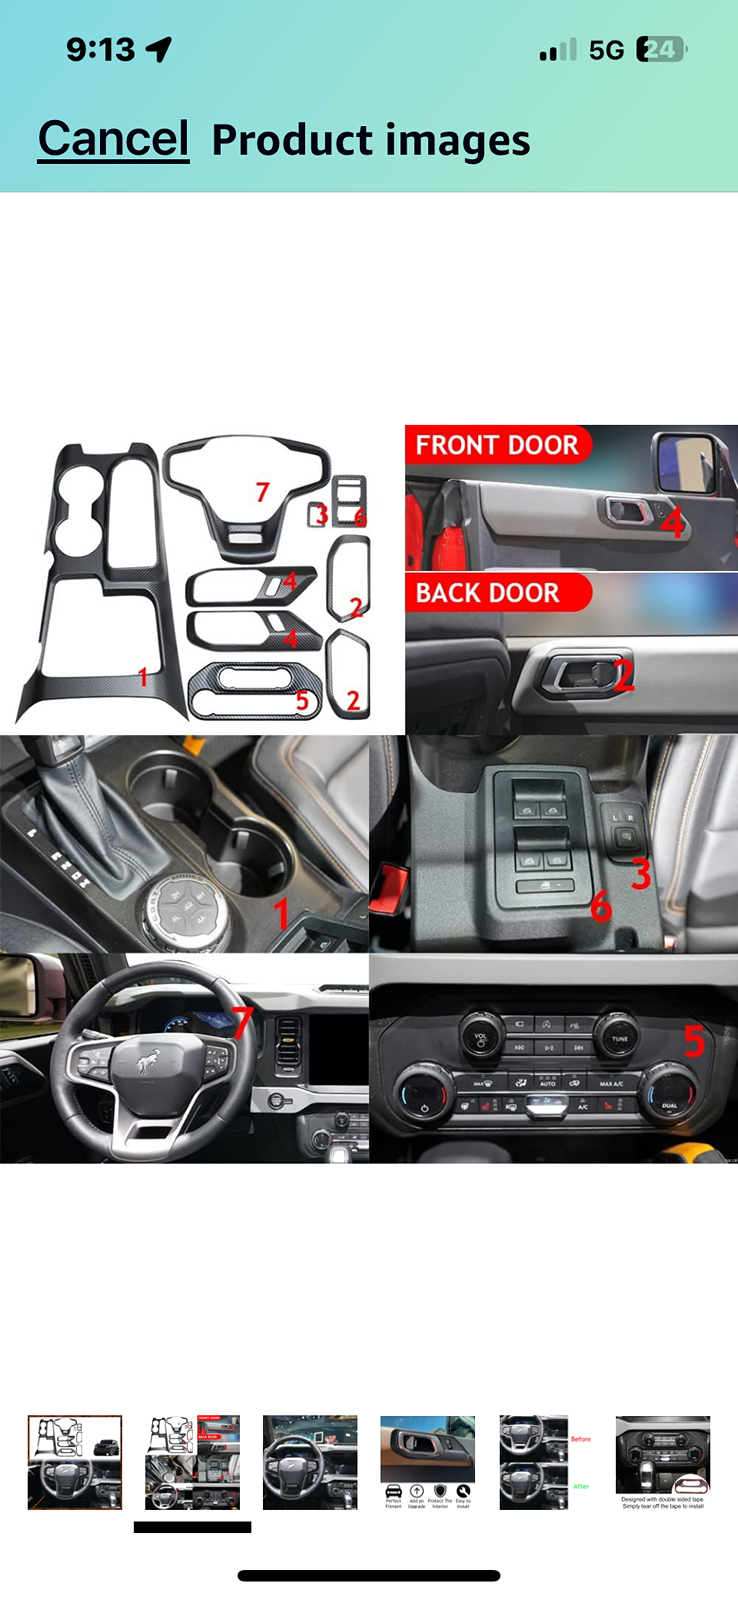 Ford Bronco (fun list!) Bronco accessories to be avoided! (keep it friendly) 1713928514029-z6